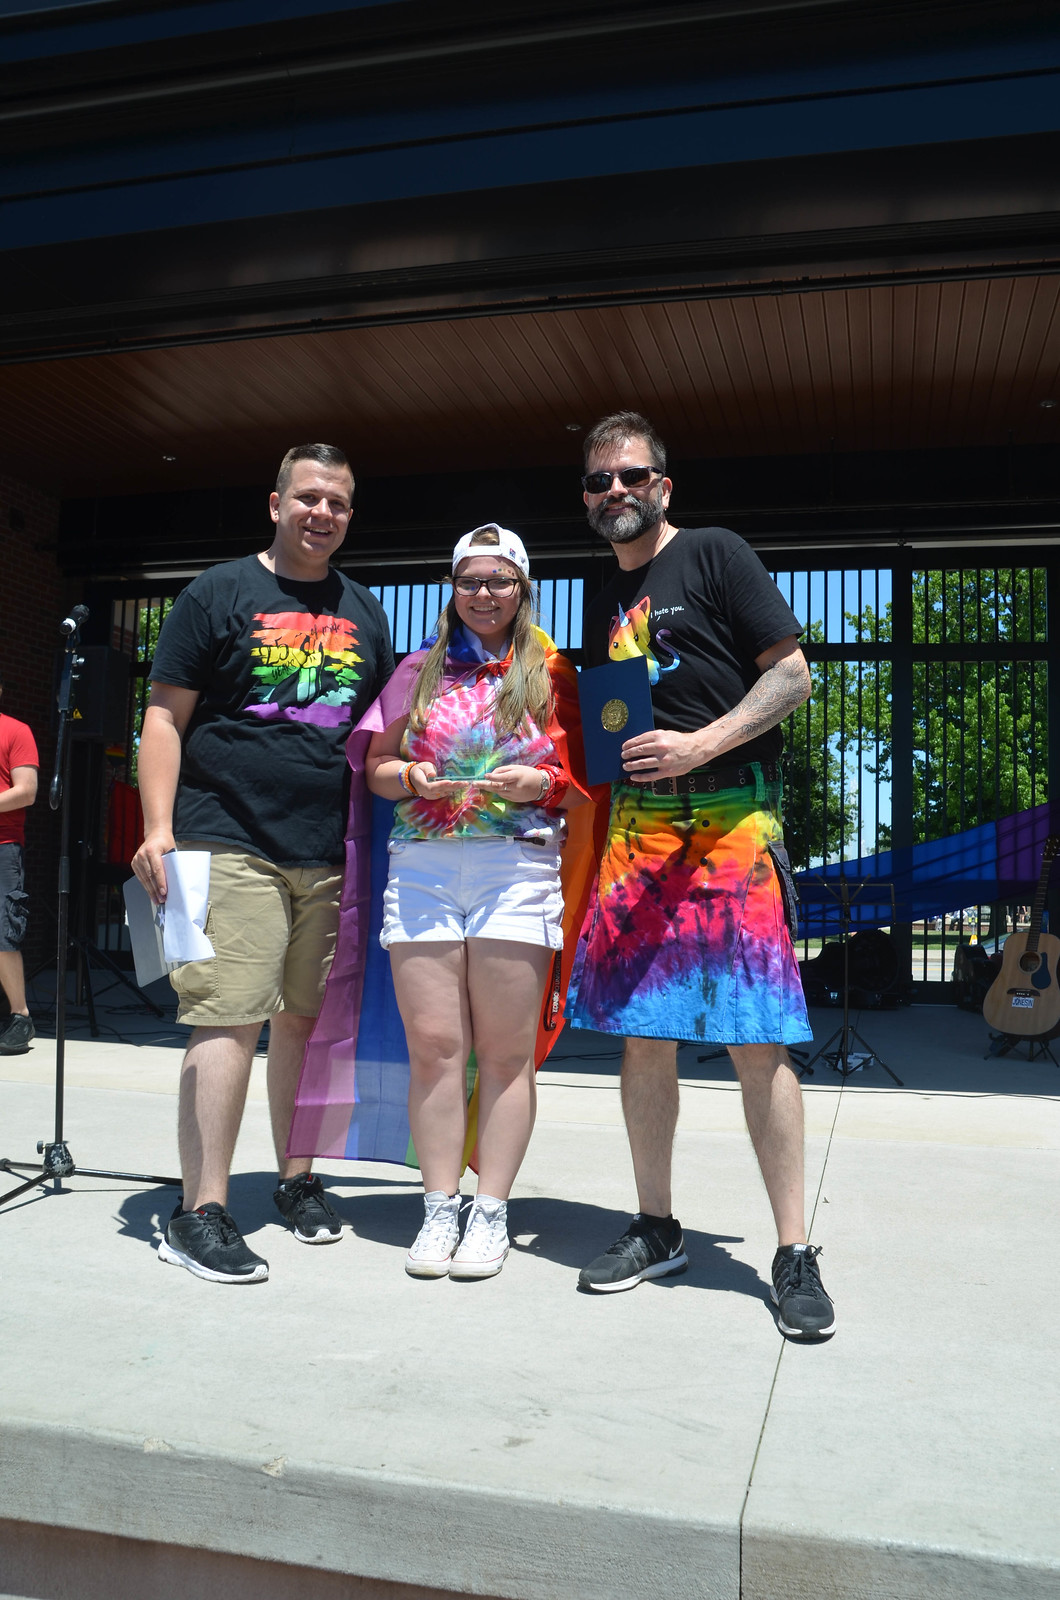 Alex honoring Identity of Edinboro University at Pride Fest. Identity - Edinboro State College students Tim Goss, Harry Miller and Ted Matthews, along with others, started an organization for gay students which was called the Homophile League. Tim Goss al